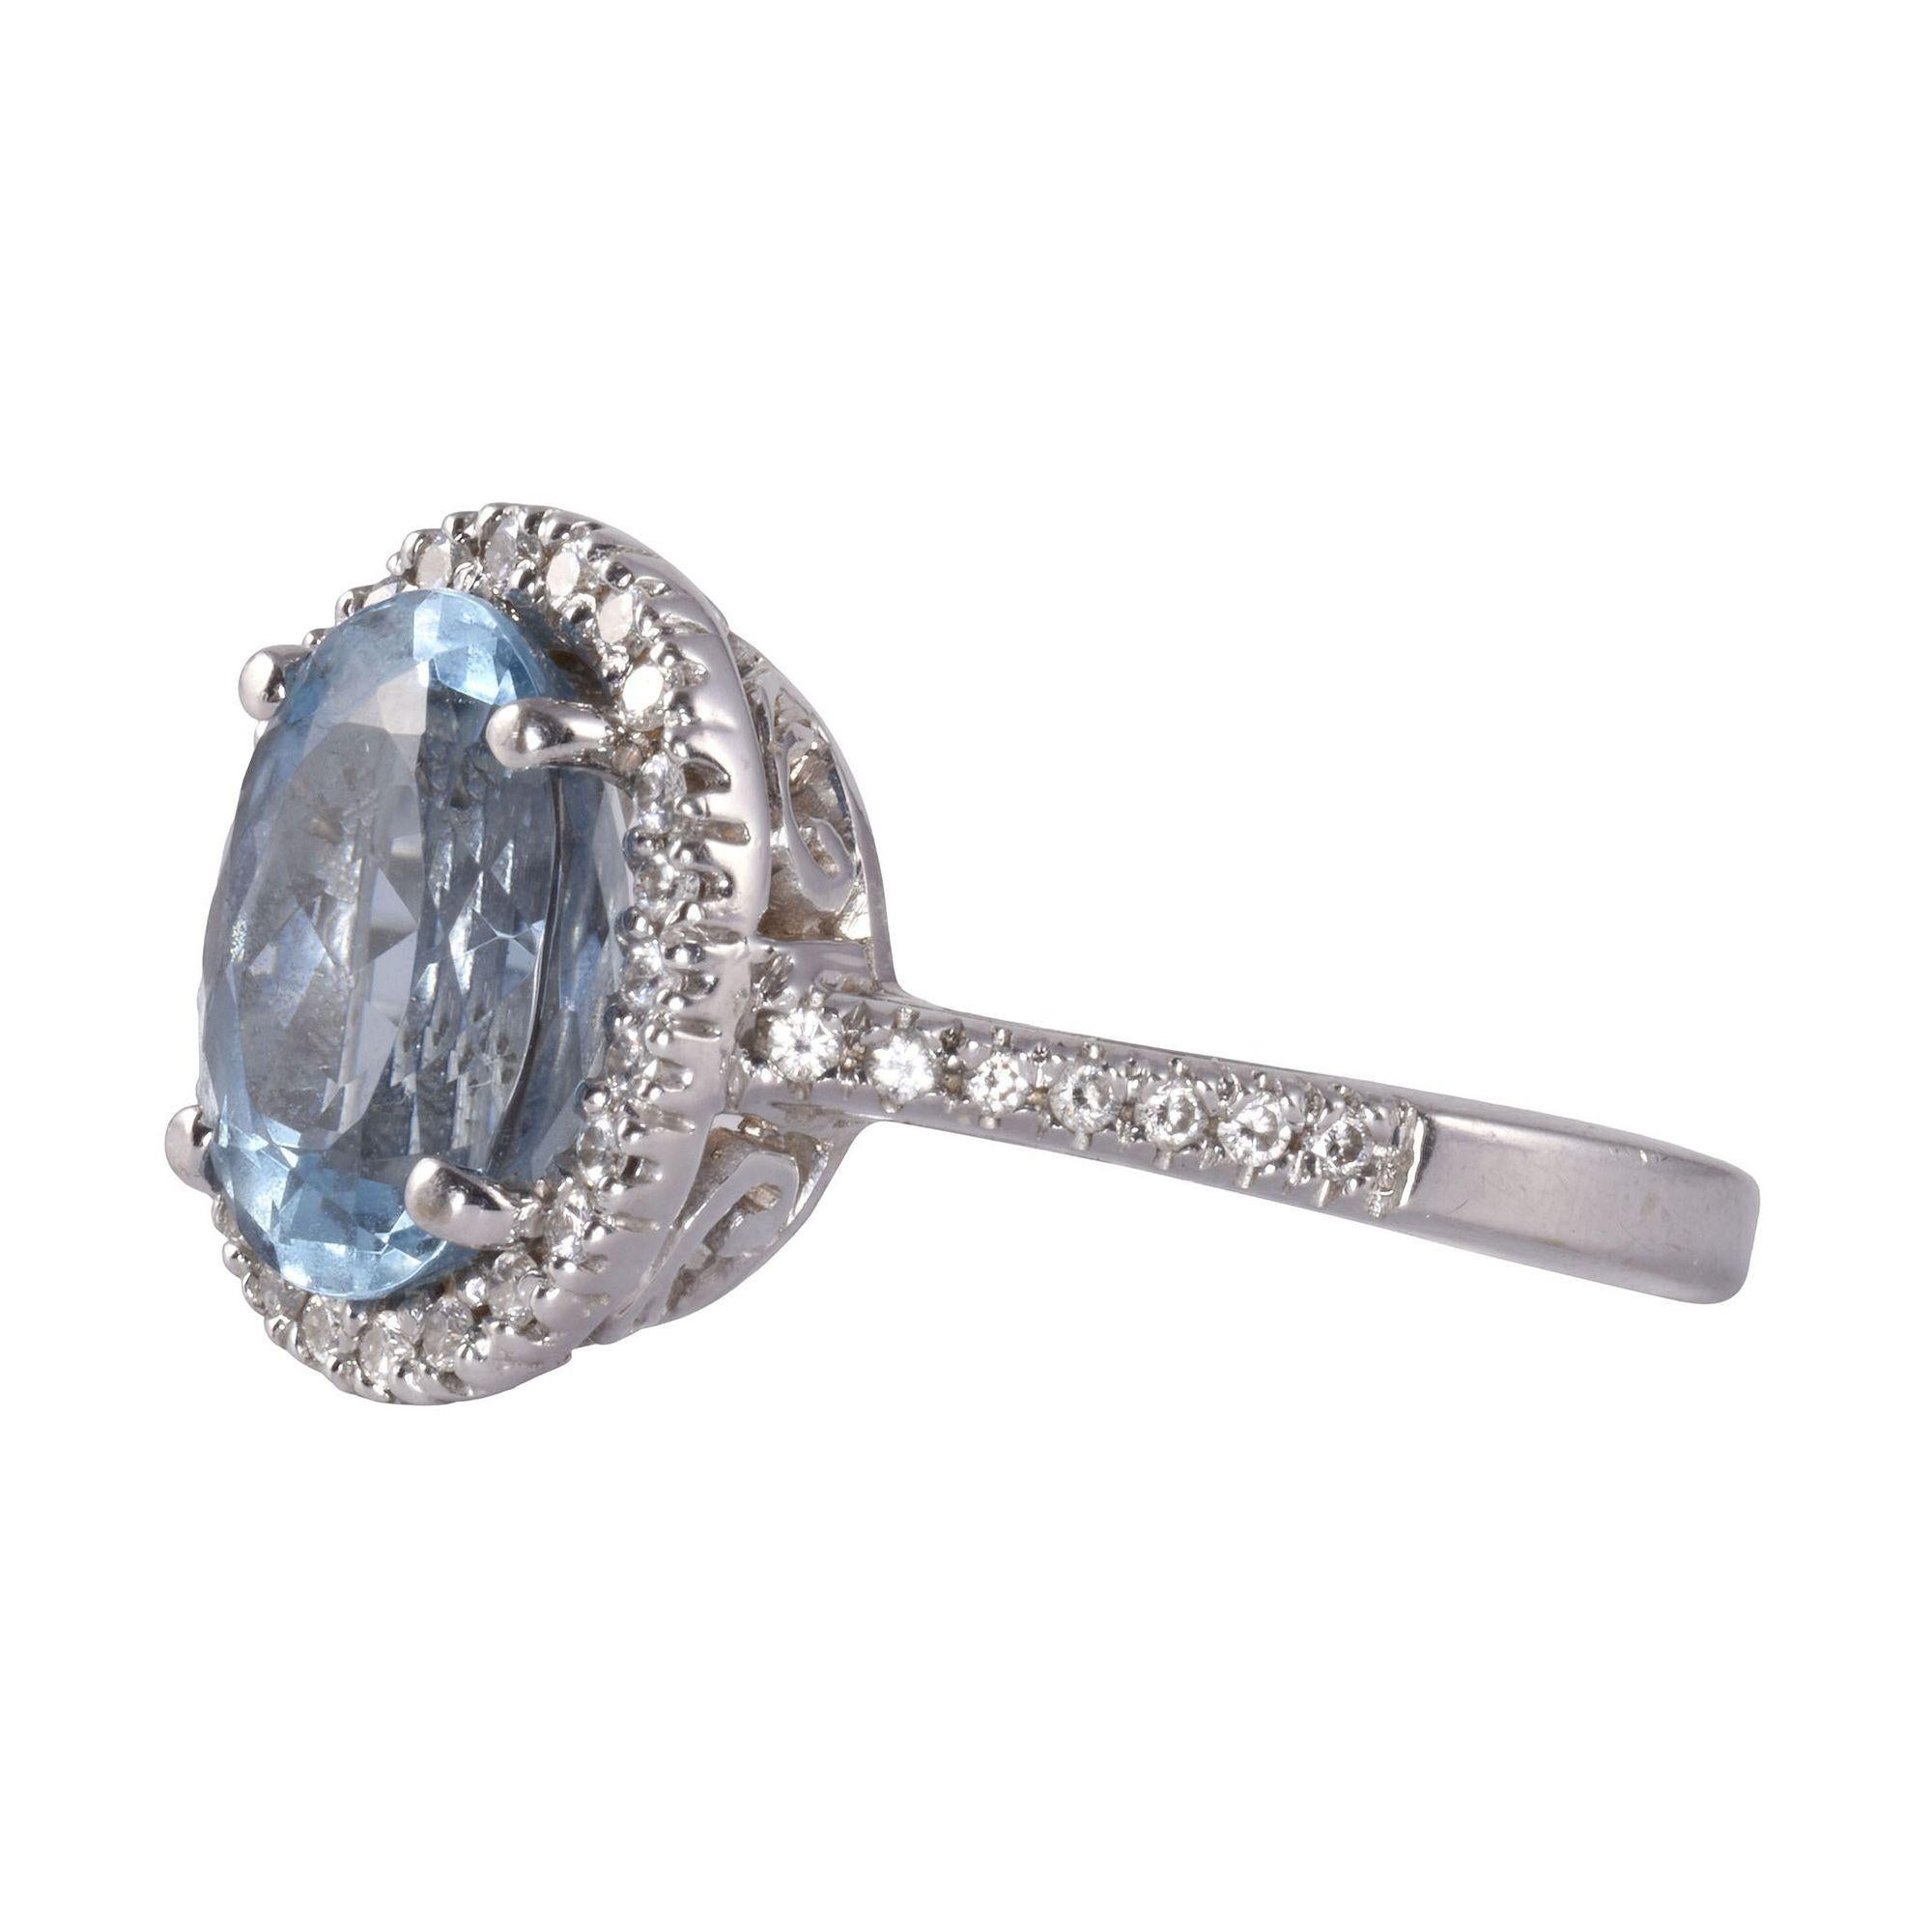 Estate diamond halo aquamarine ring. This 14 karat white gold ring features a 2.75 carat oval aquamarine center with very nice quality. It is accented with .48 carat total weight of diamonds having VS-SI clarity and G-H color. The white gold